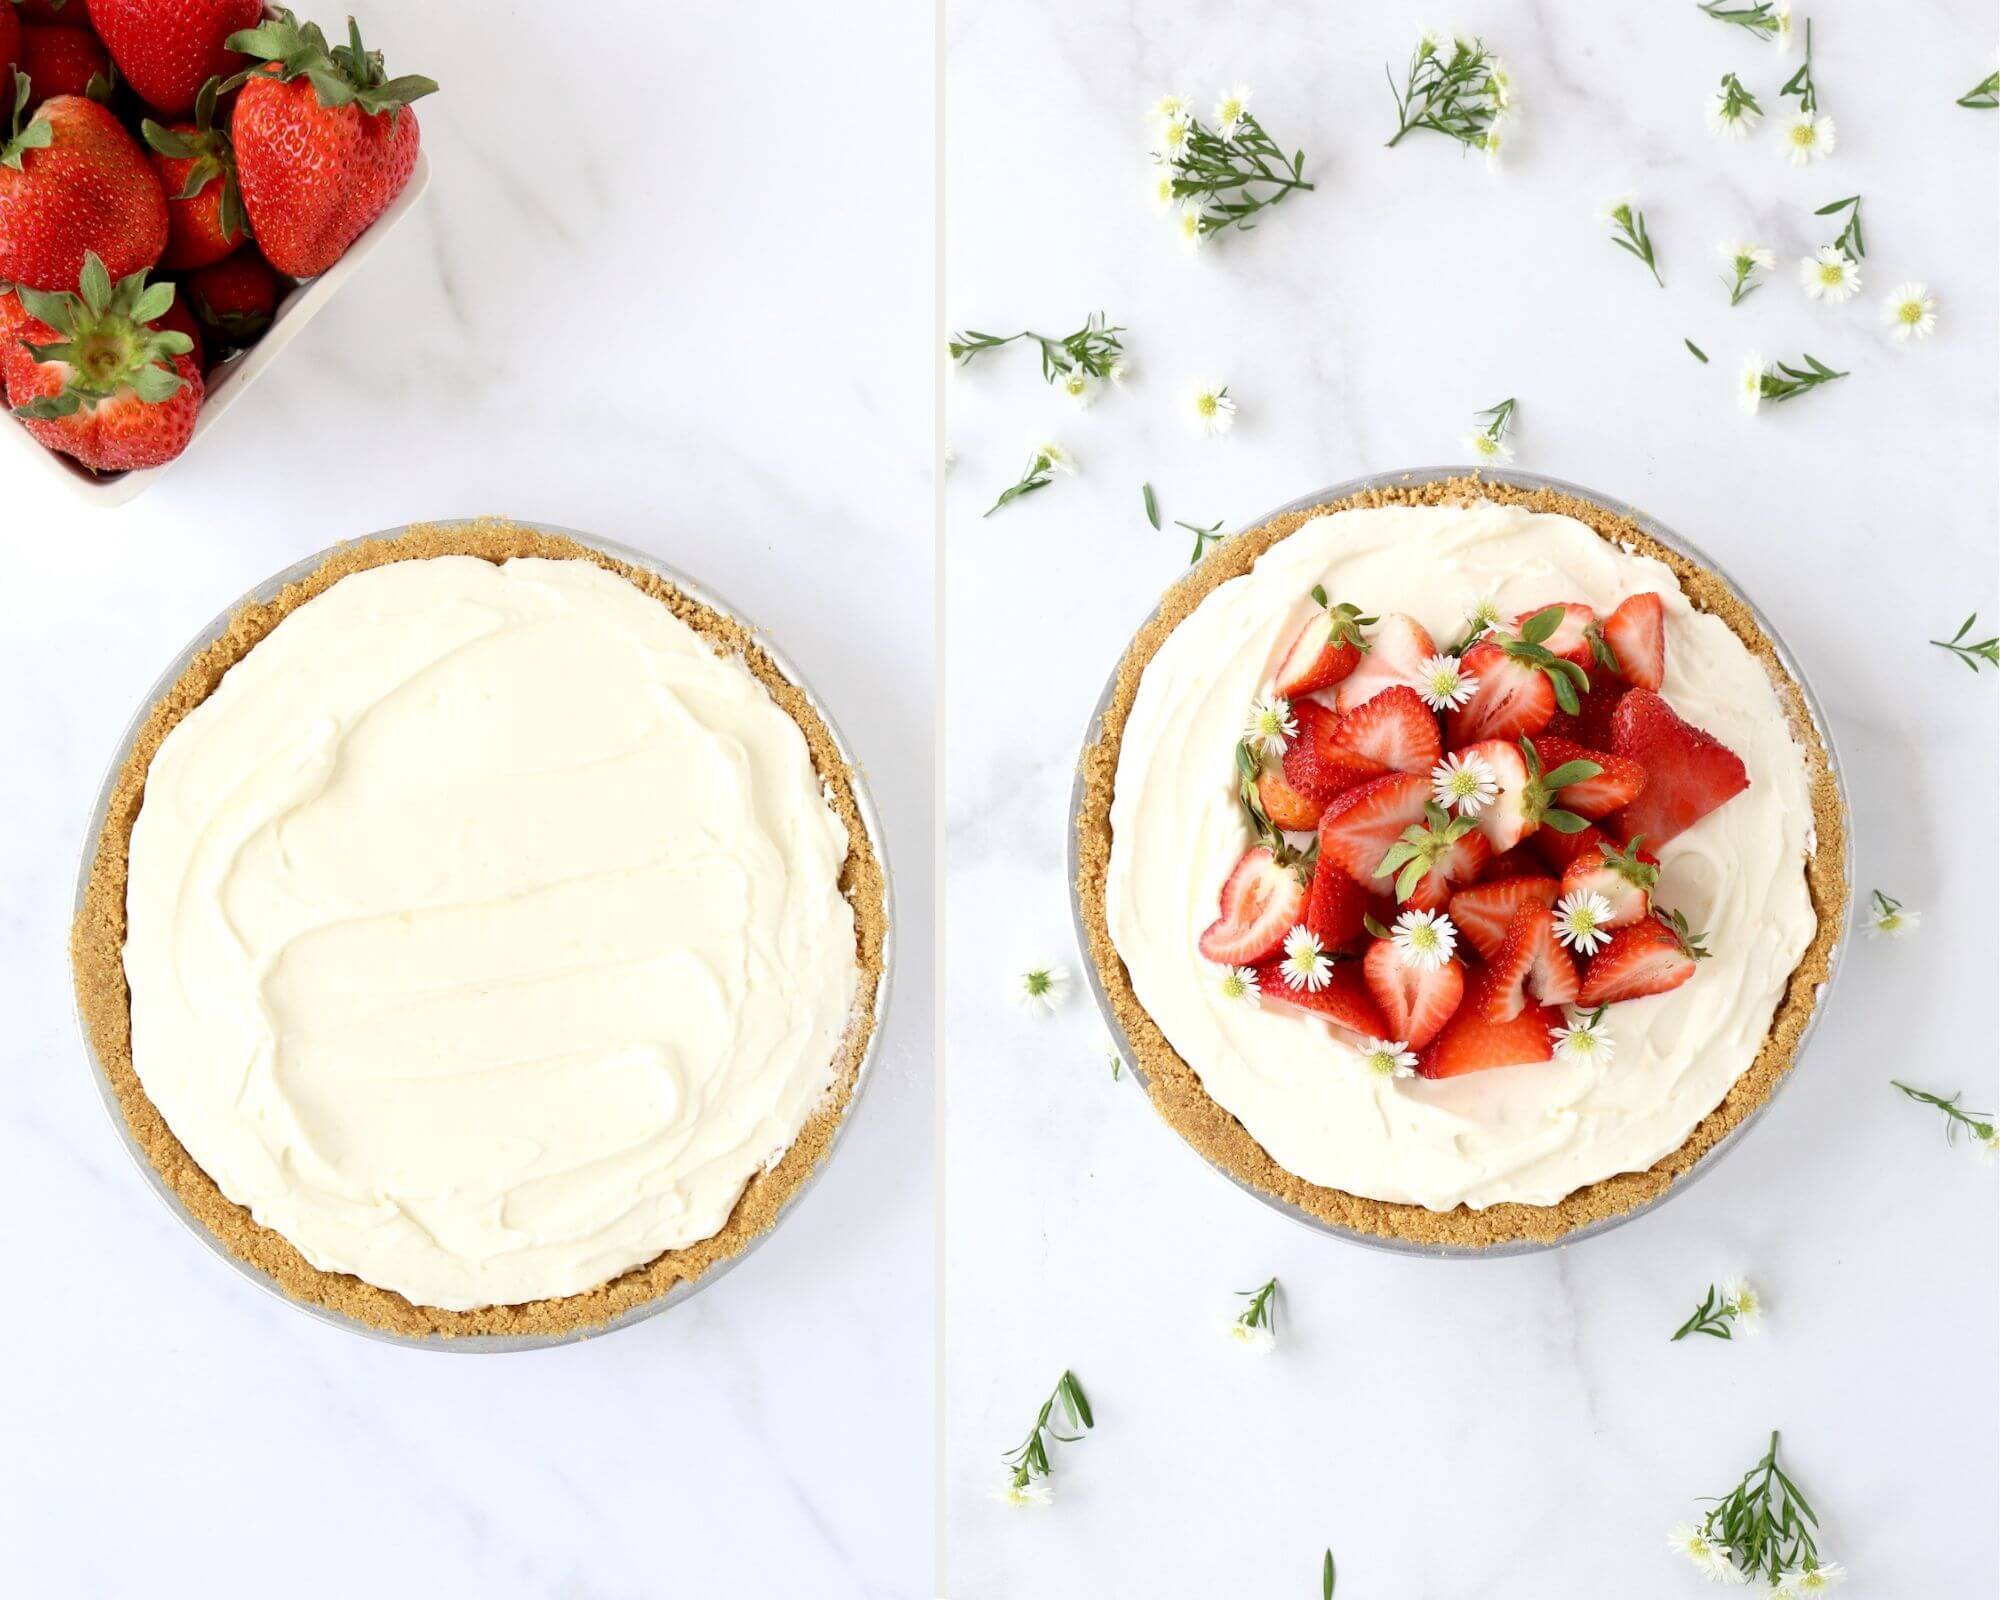 Graham cracker crust filled with whipped cheesecake next to a completed pie garnished with fresh strawberries sliced and fresh flowers.